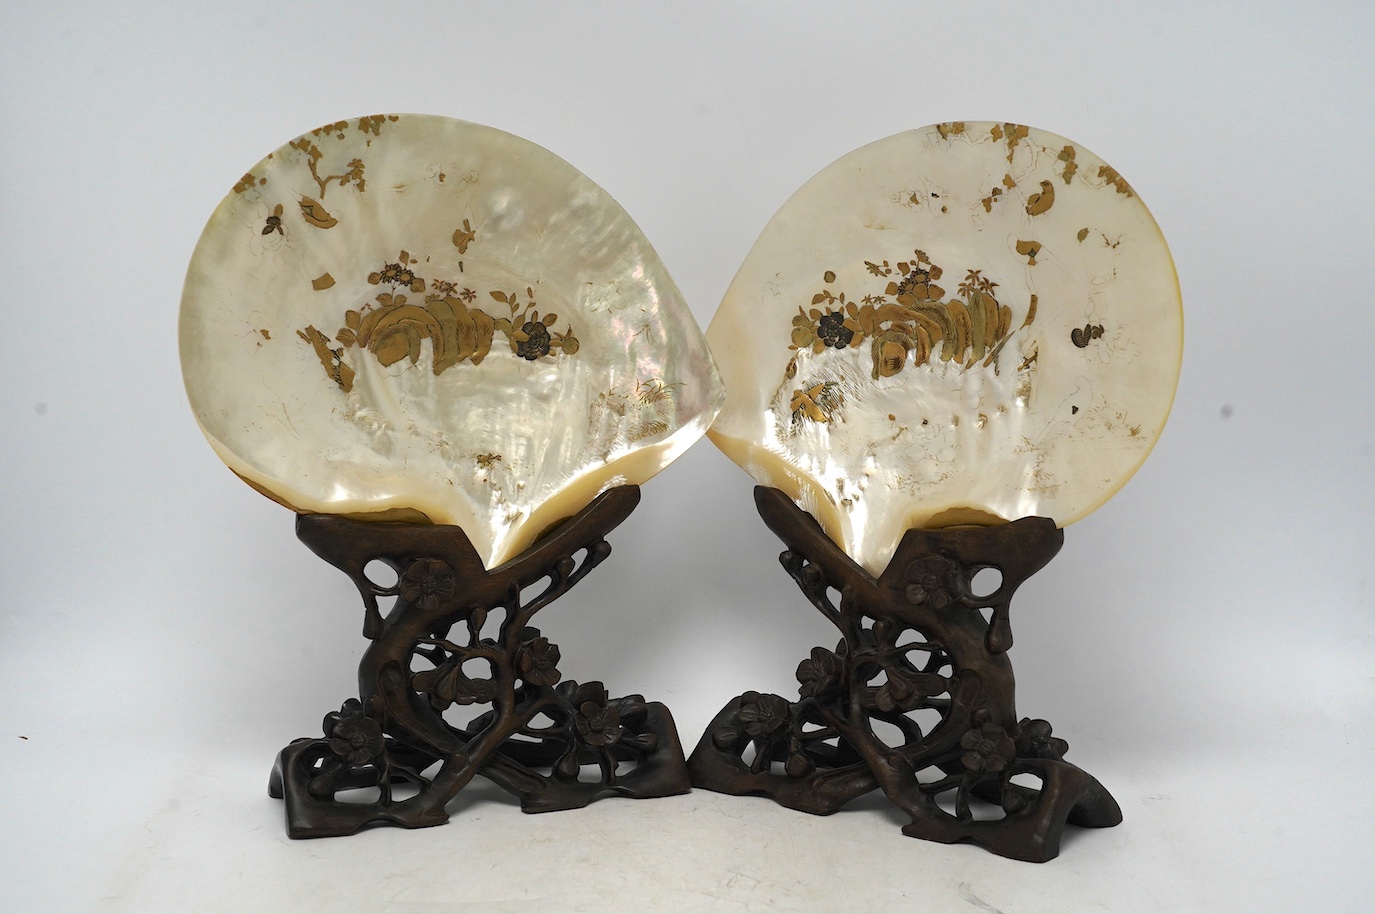 A pair of Japanese gold lacquer mother-of-pearl shells on Chinese hongmu stands, late 19th century, shells 25cm wide. Condition - fair to good